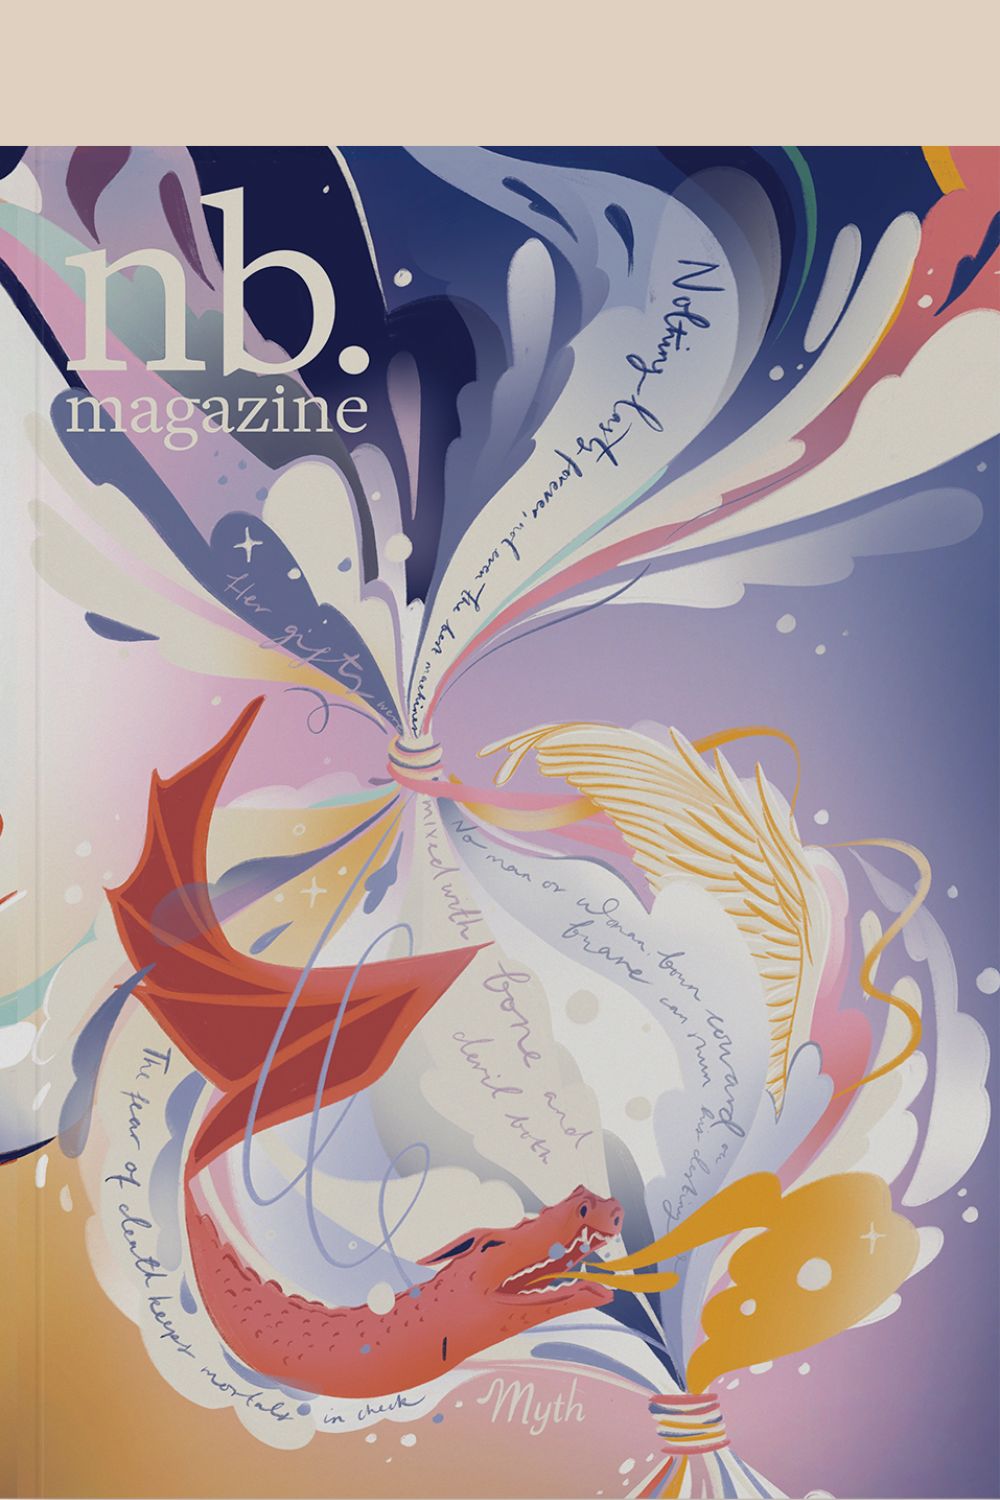 nb. magazine cover issue 117